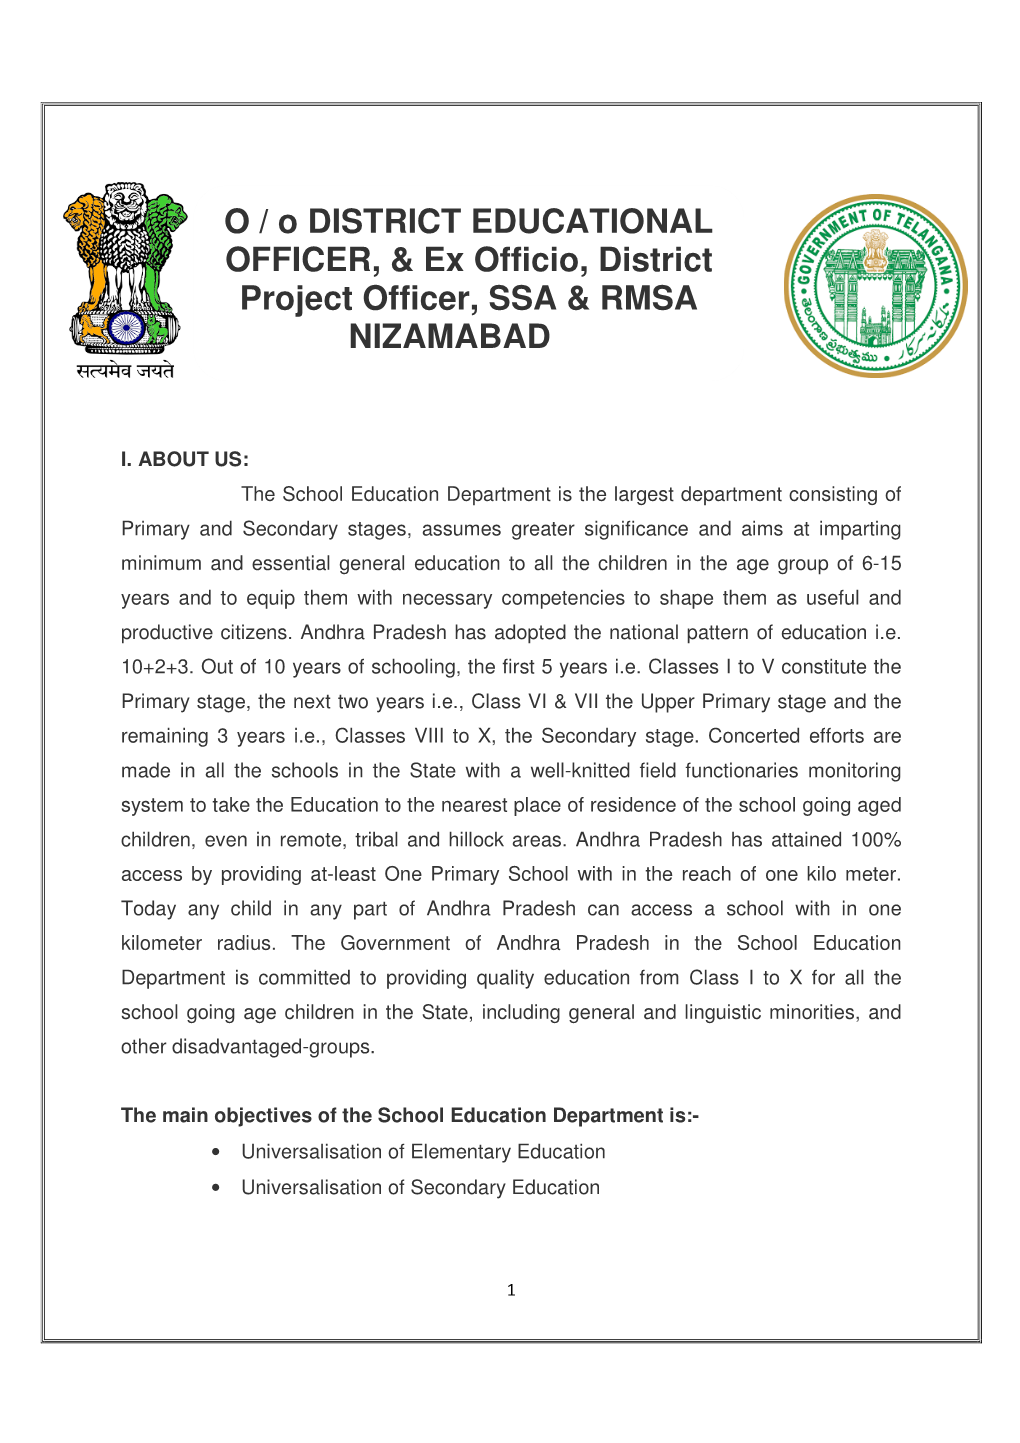 O / O DISTRICT EDUCATIONAL OFFICER, & Ex Officio, District